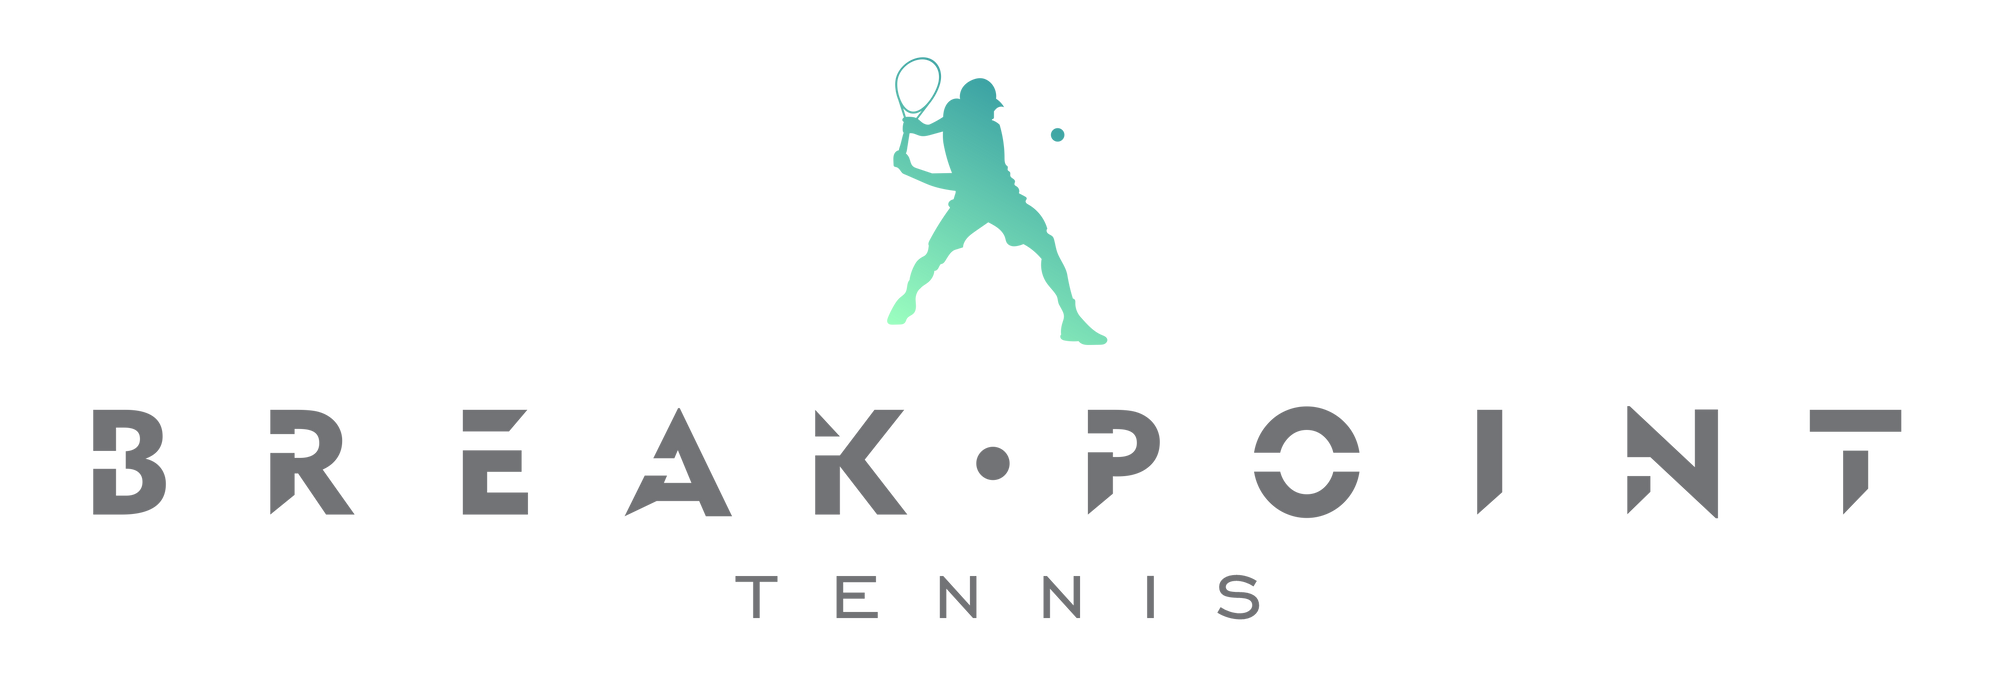 Tennis coaching, stringing, and apparel in the Toronto region. Competitive rates high quality products and services. 